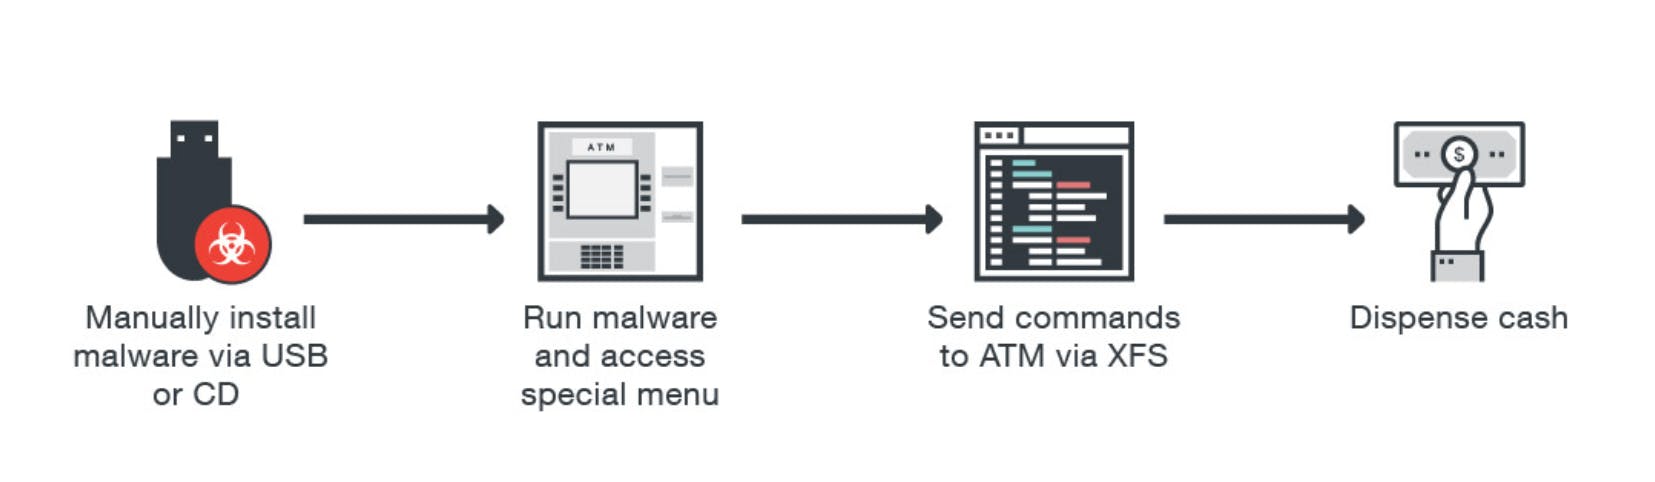 atm physical attack steps for hackers